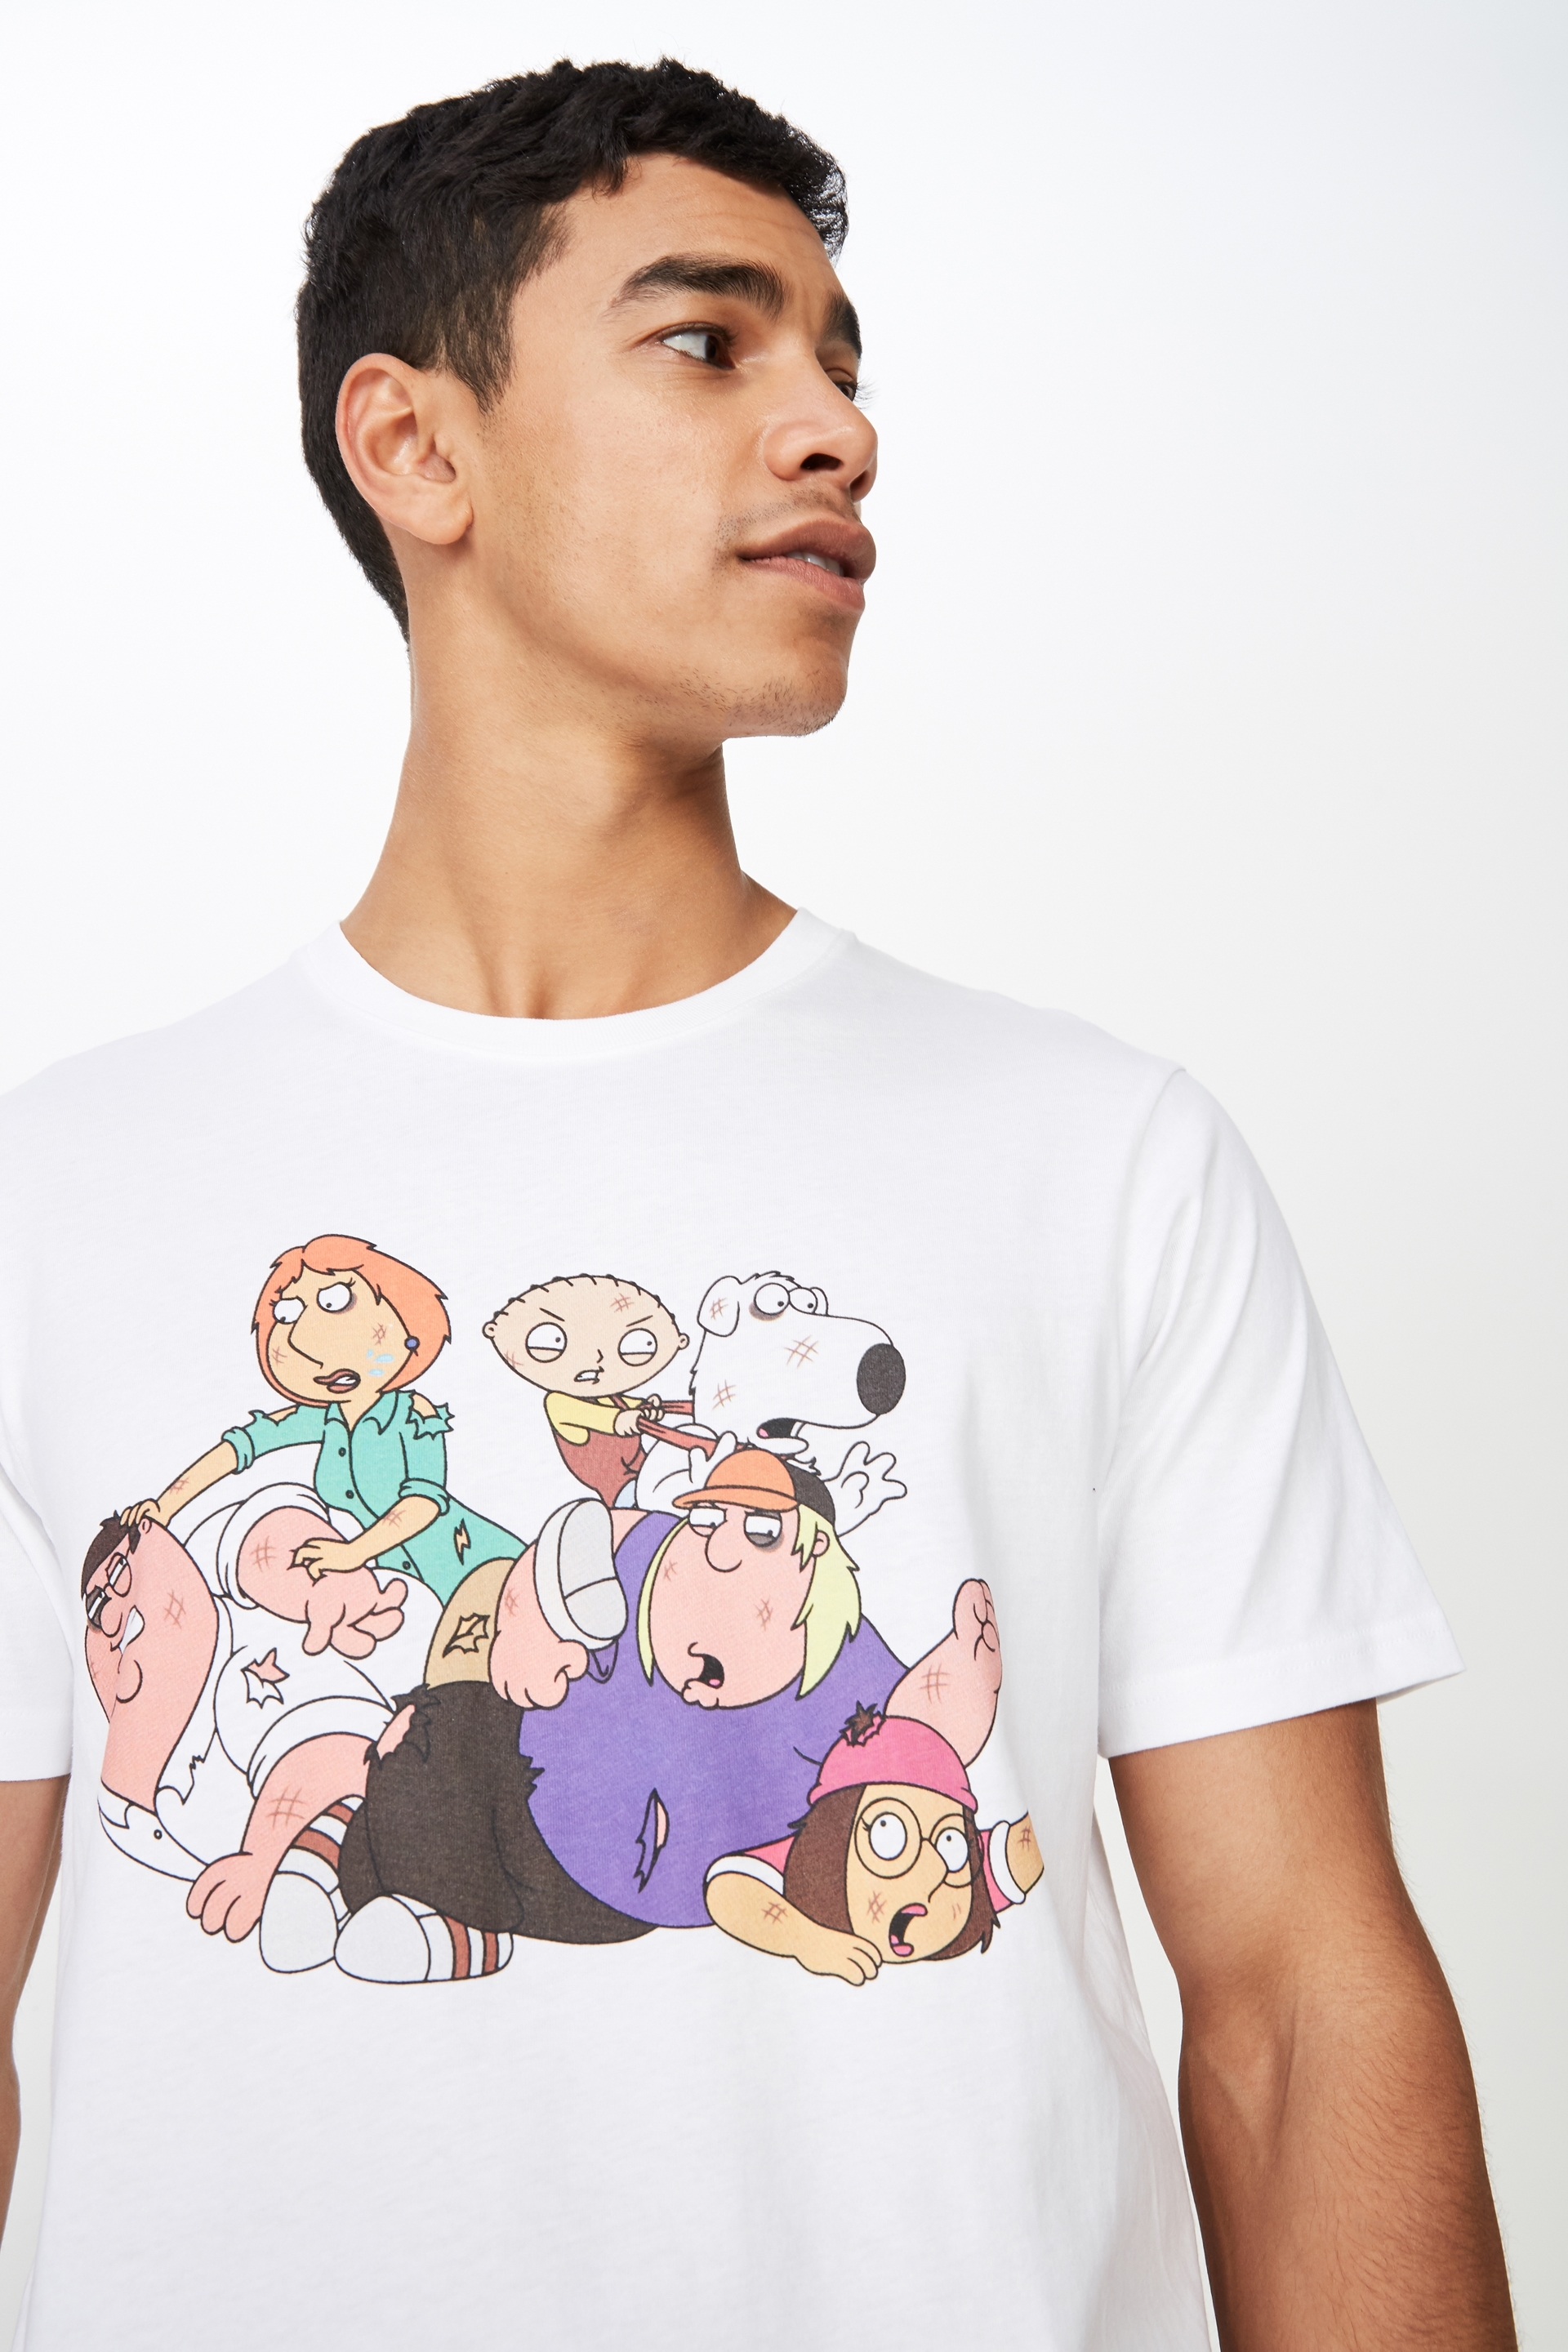 FAMILY GUY WHATS UP Licensed Men/'s Graphic Tee Shirt SM-5XL